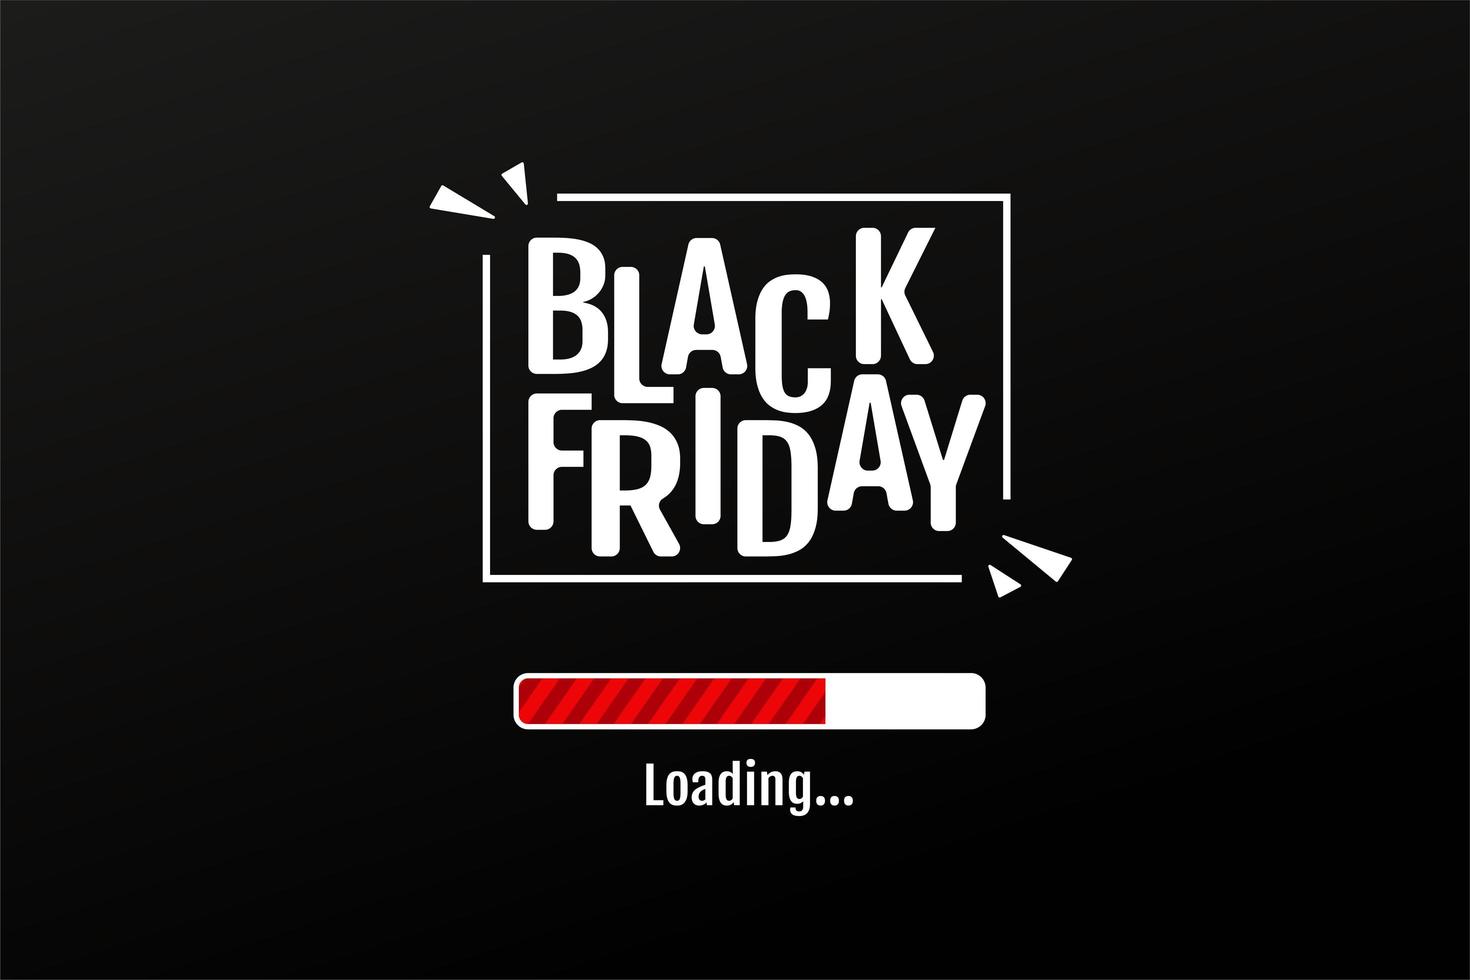 The download bar counts the days of the Black Friday sale promotion vector